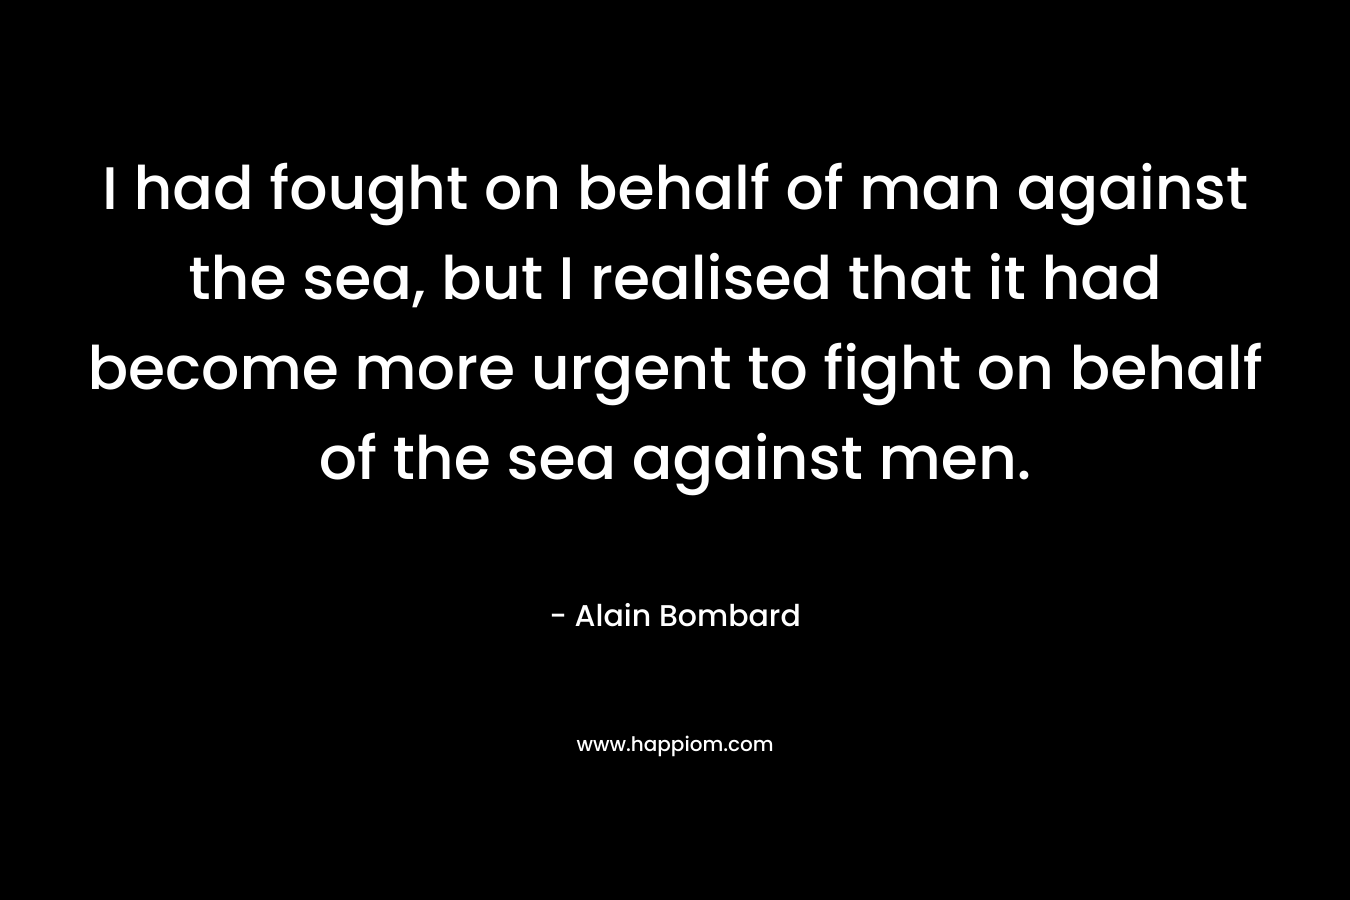 I had fought on behalf of man against the sea, but I realised that it had become more urgent to fight on behalf of the sea against men. – Alain Bombard